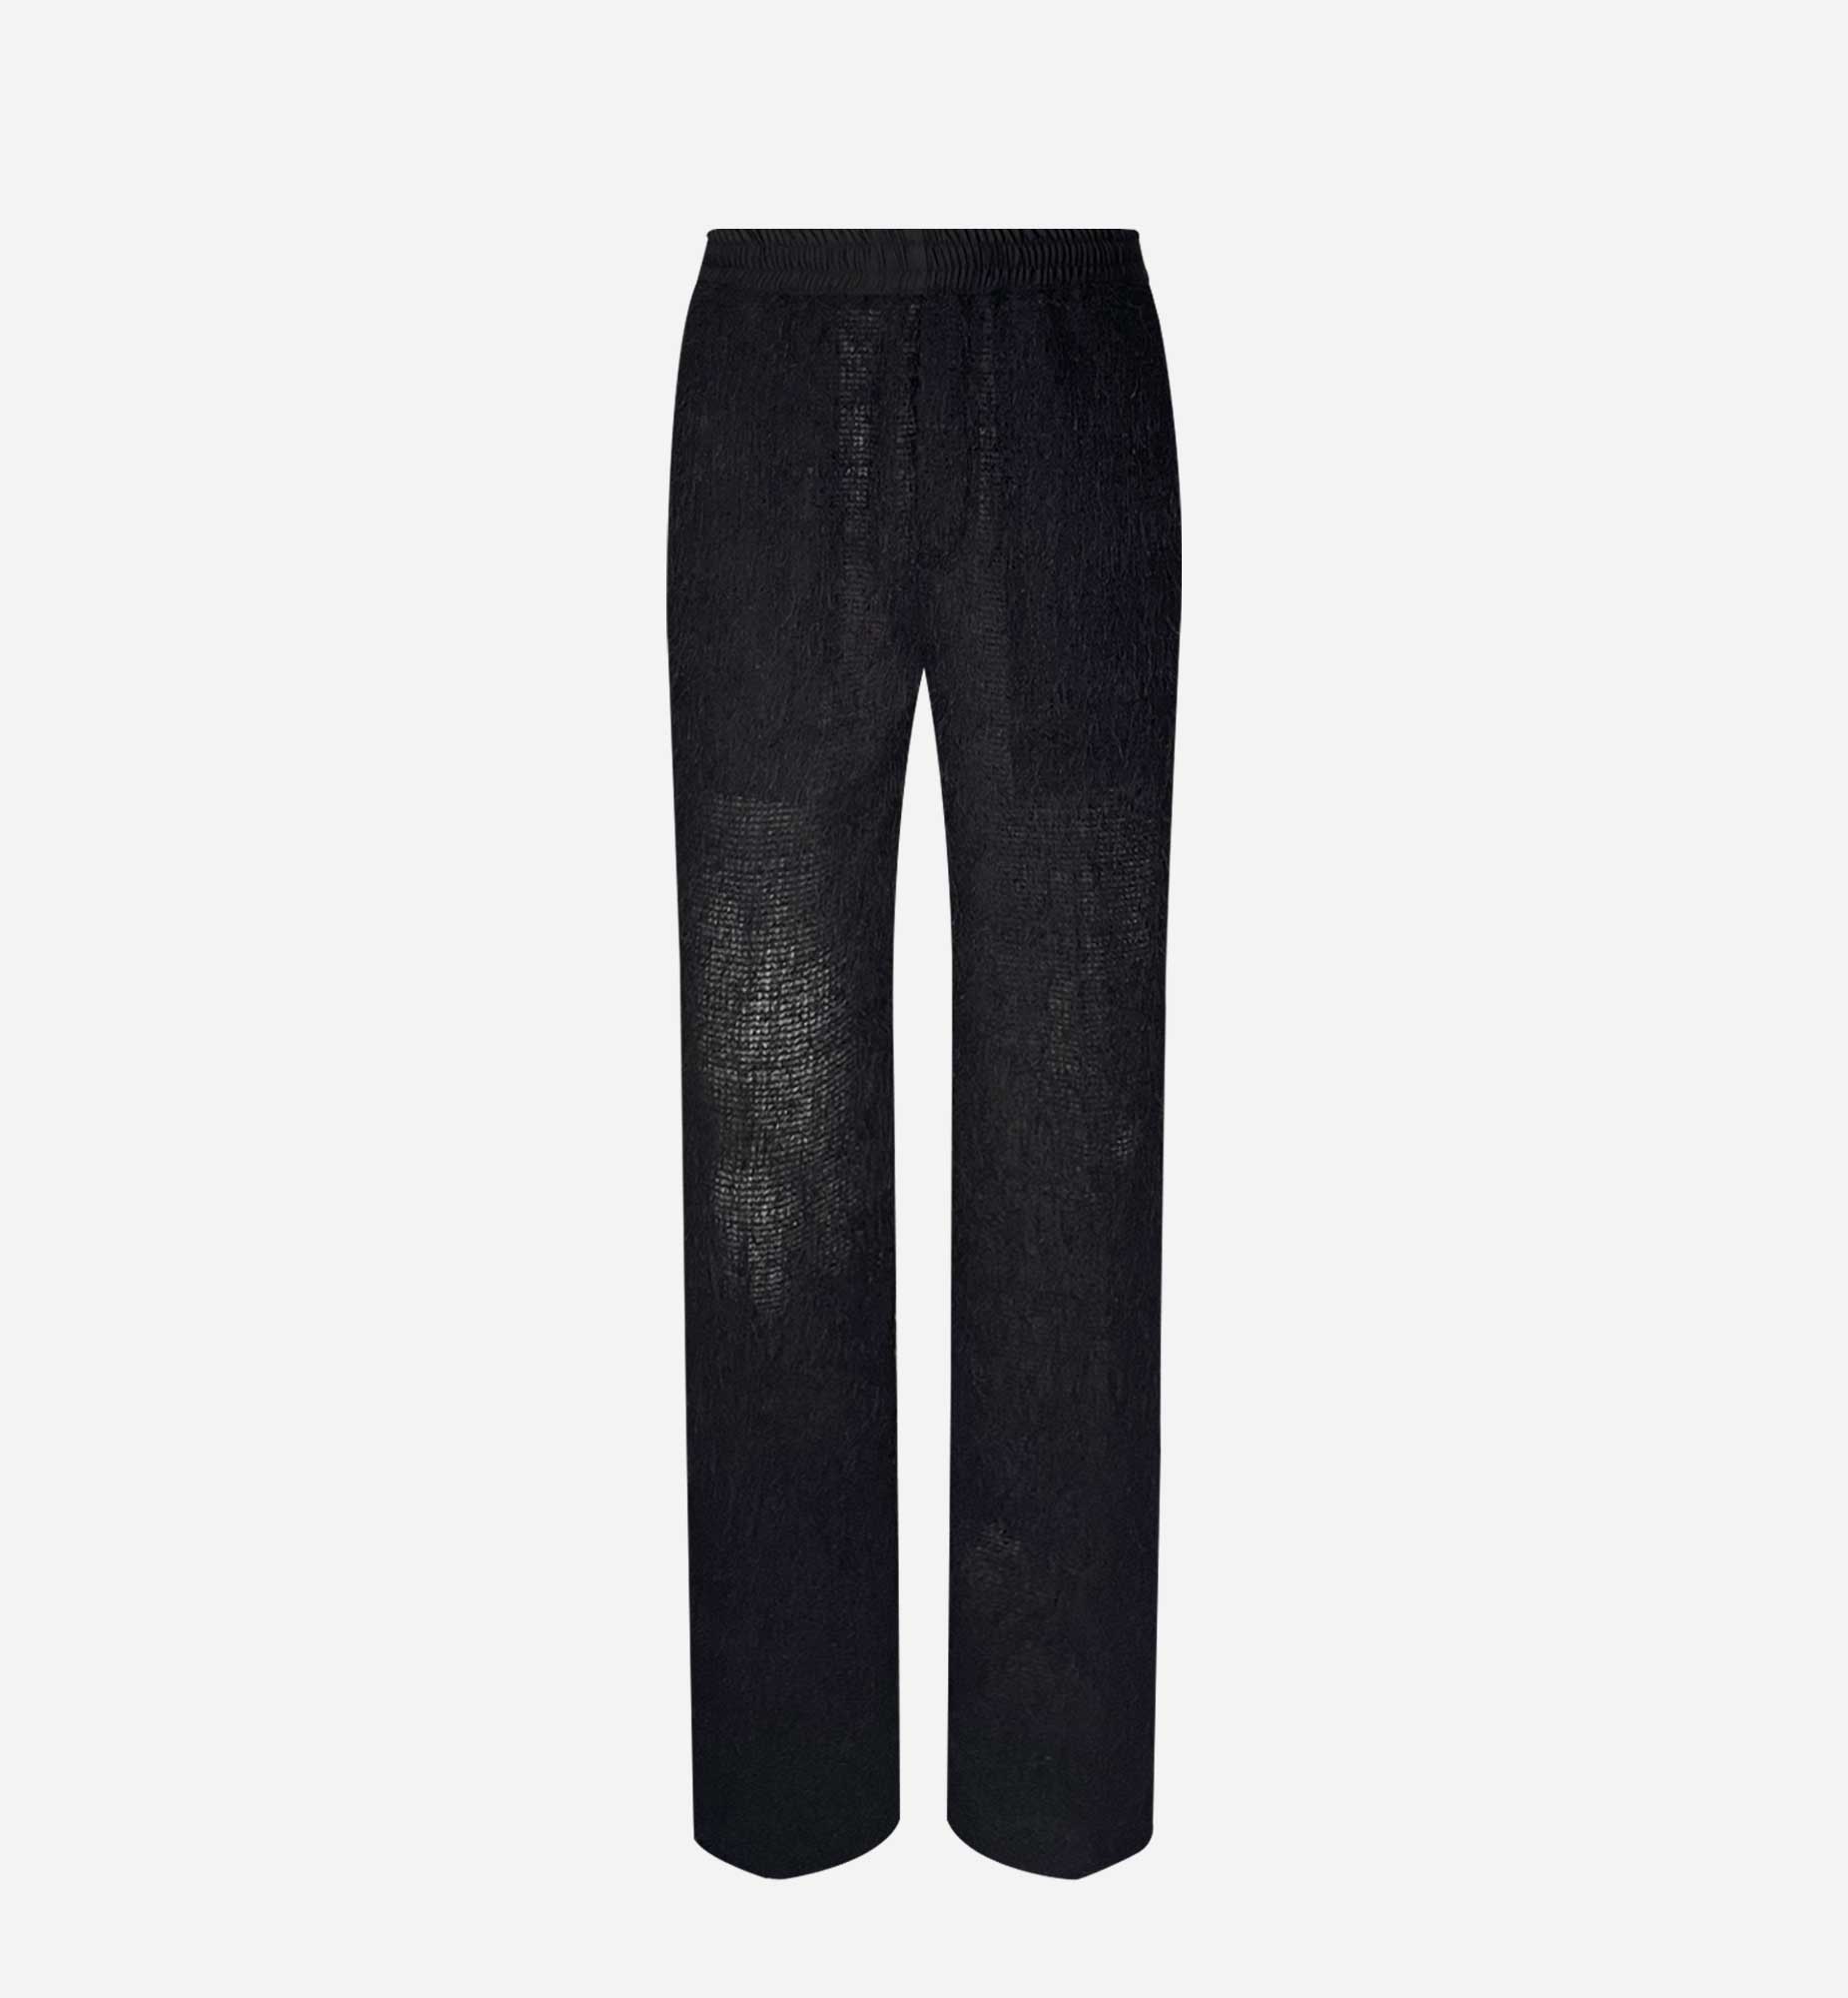 BLACK FRINGED KNIT TROUSERS WITH ELASTIC BELT